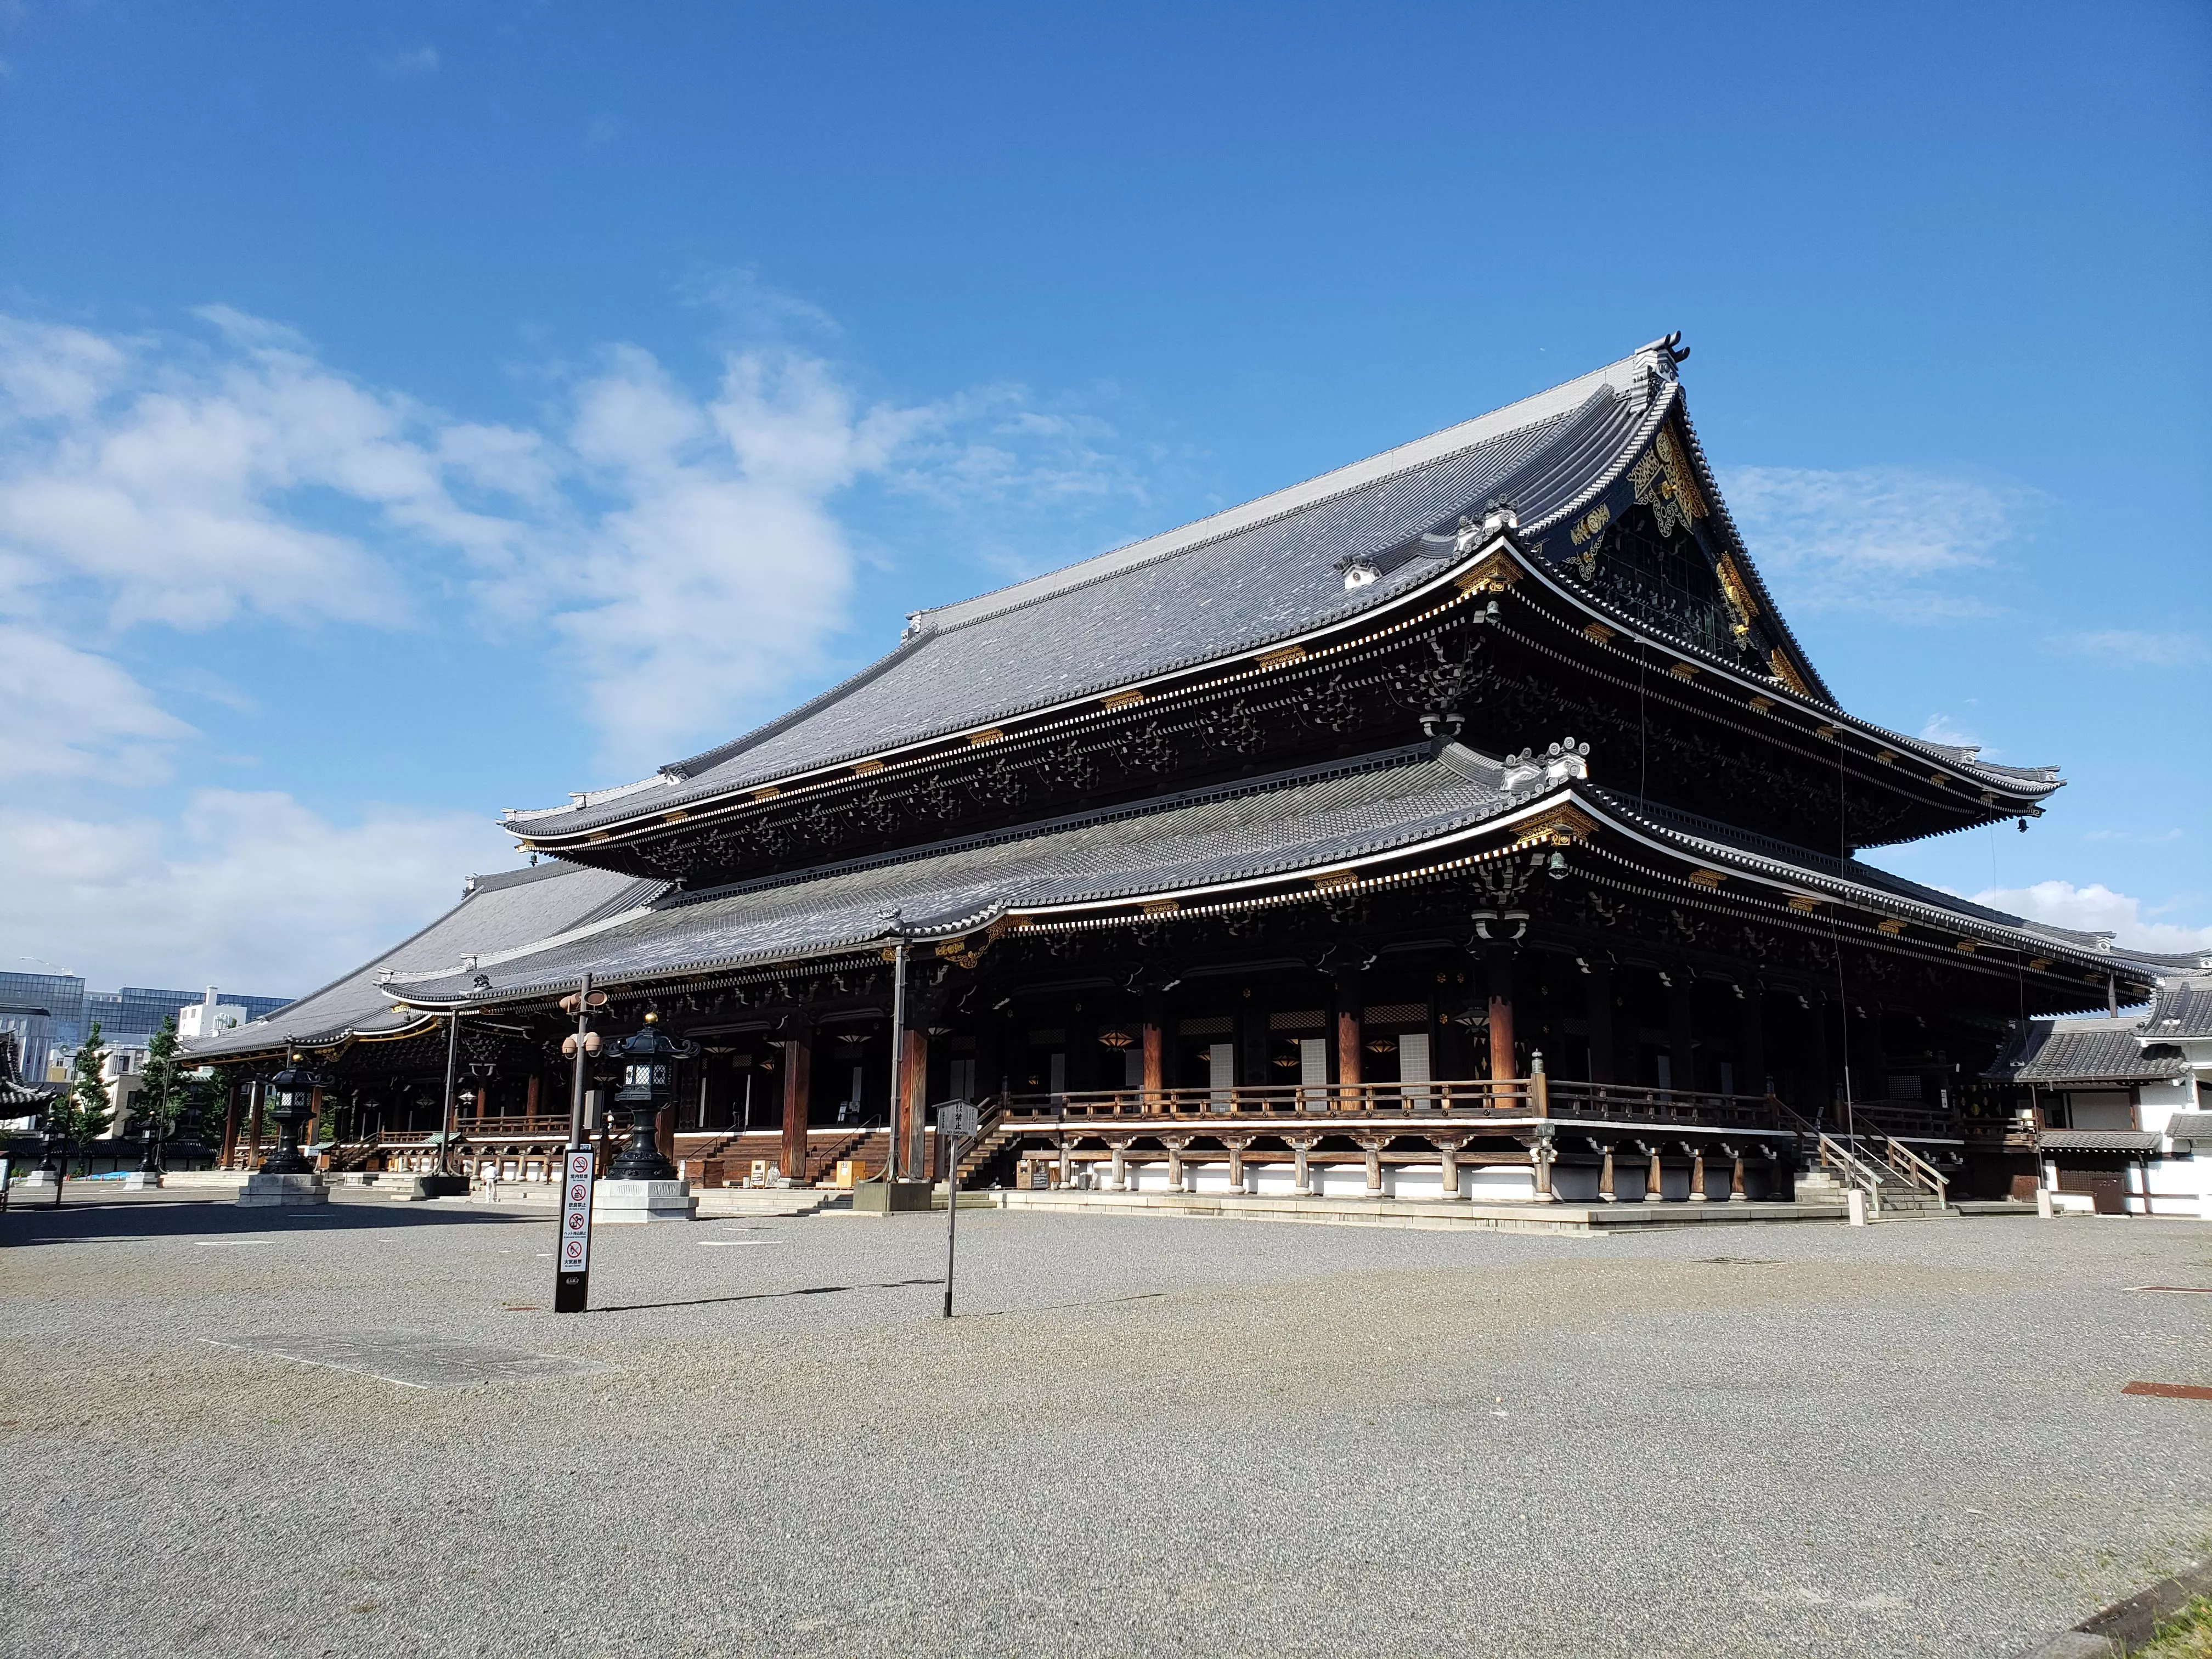 Higashi-Honganji Temple in Japan, East Asia | Architecture - Rated 3.7